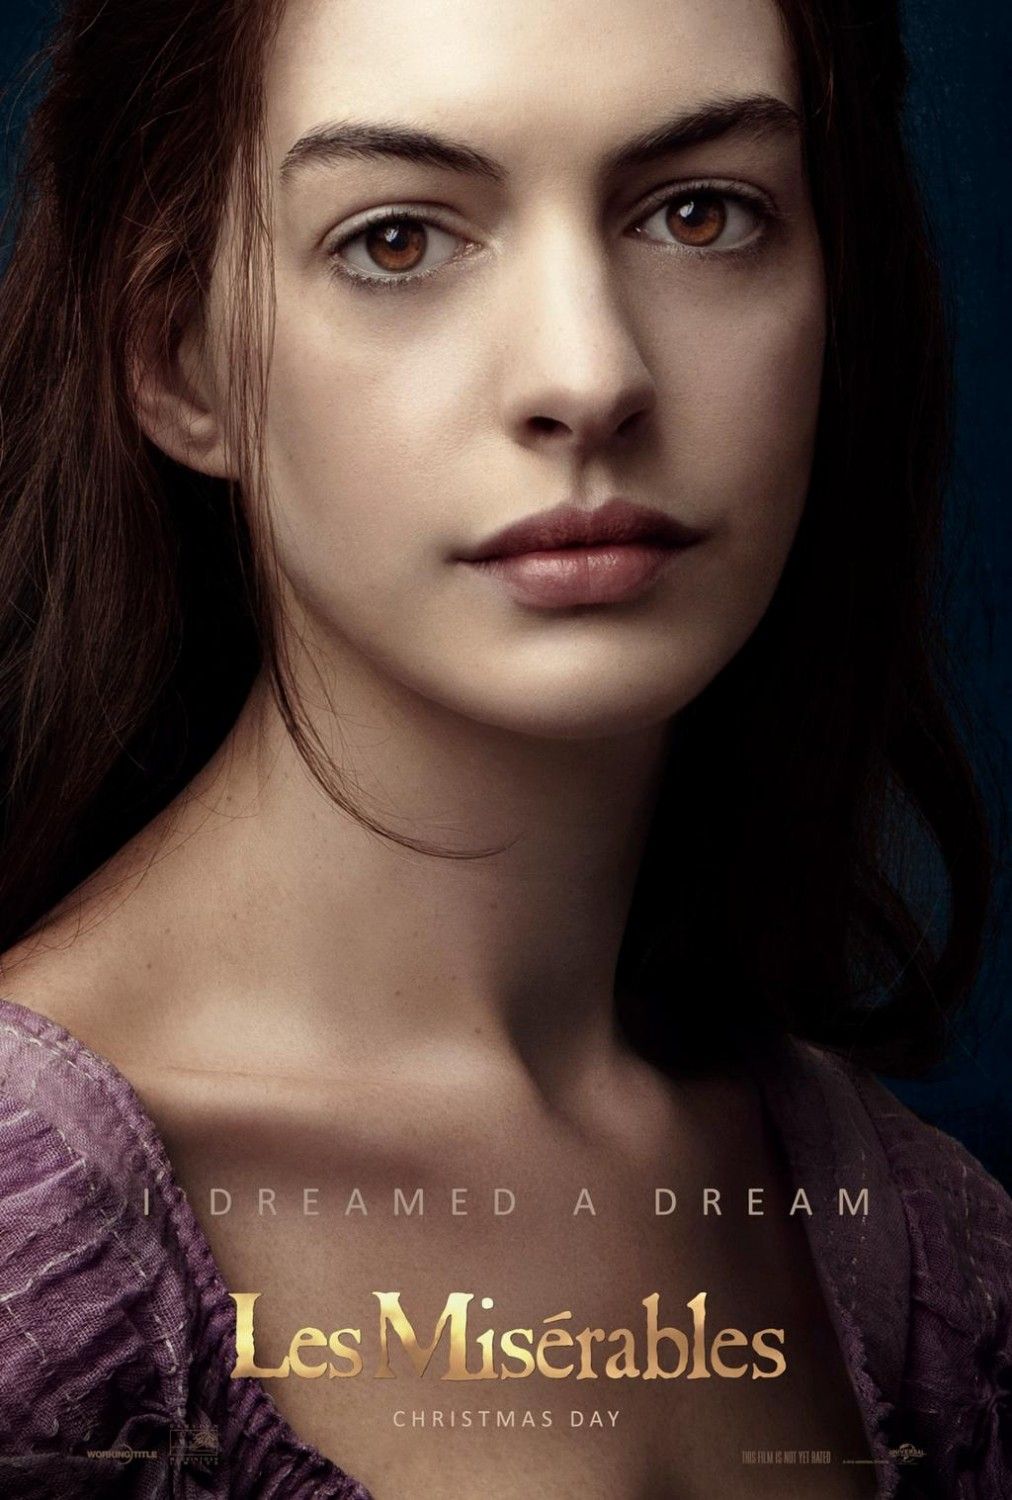 Les Miserables Anne Hathaway poster